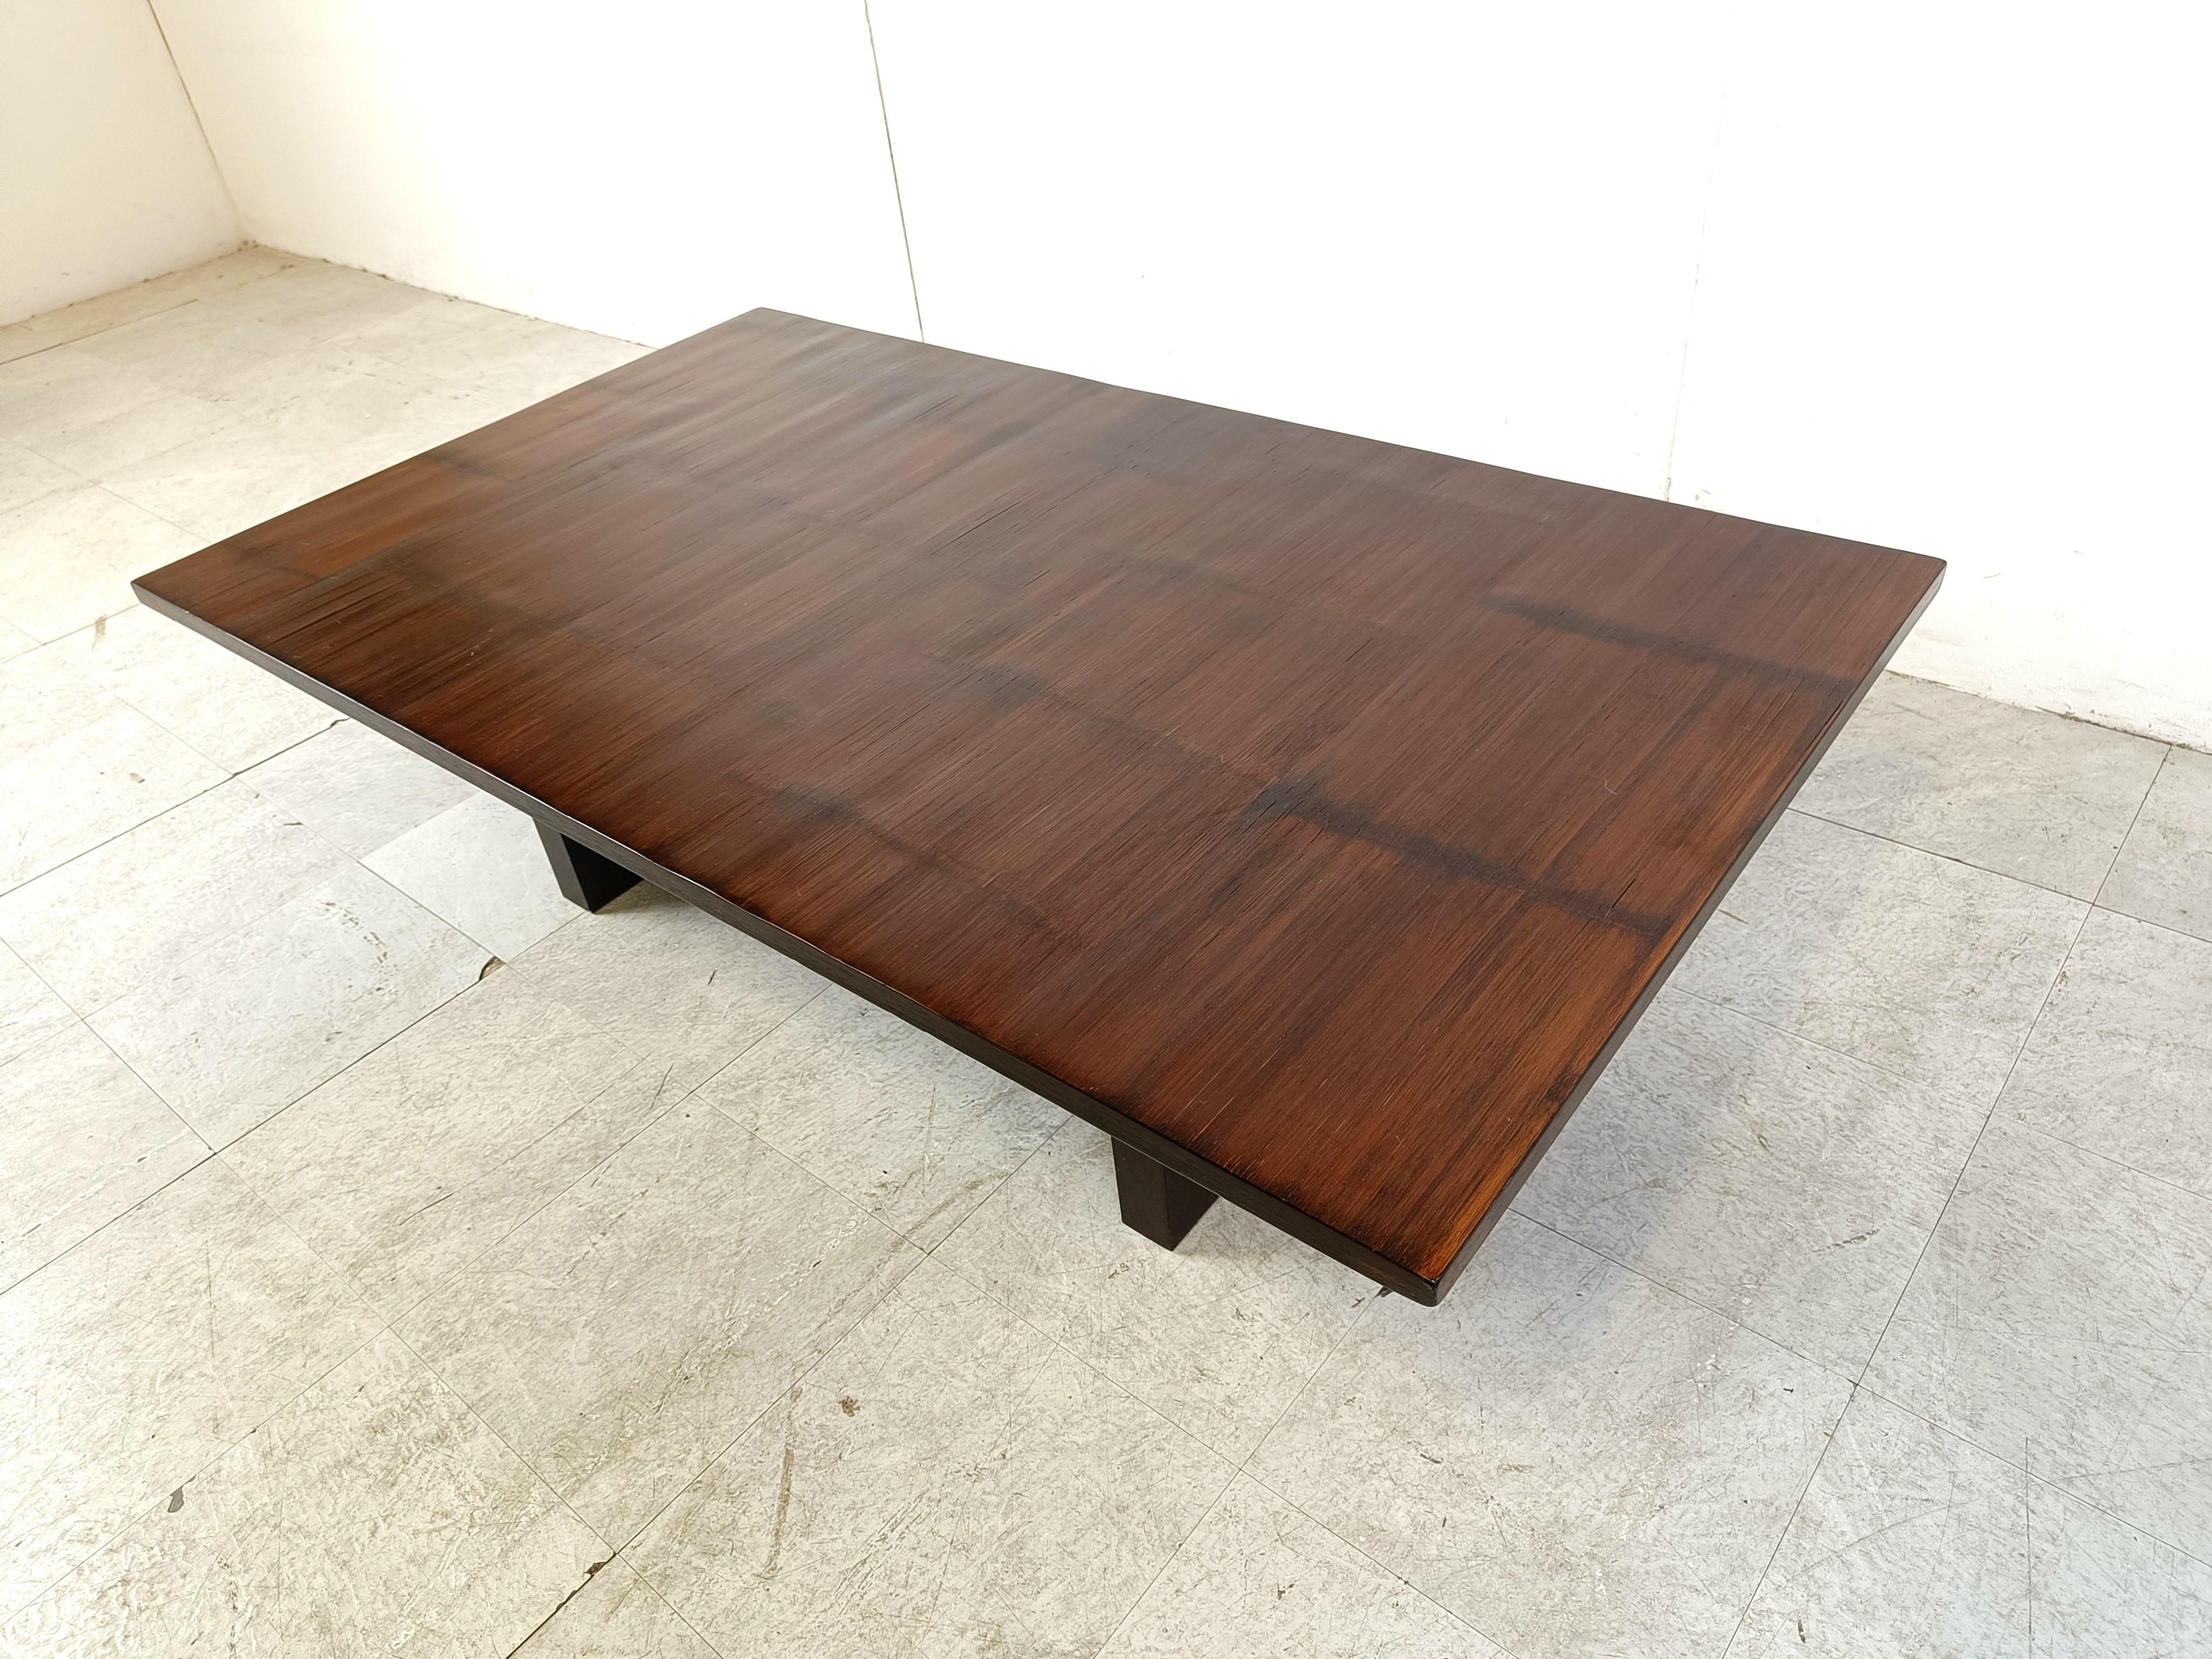 Late 20th Century Belgian Coffee Table in Wenge and Bamboo by Axel Vervoordt, 1980s